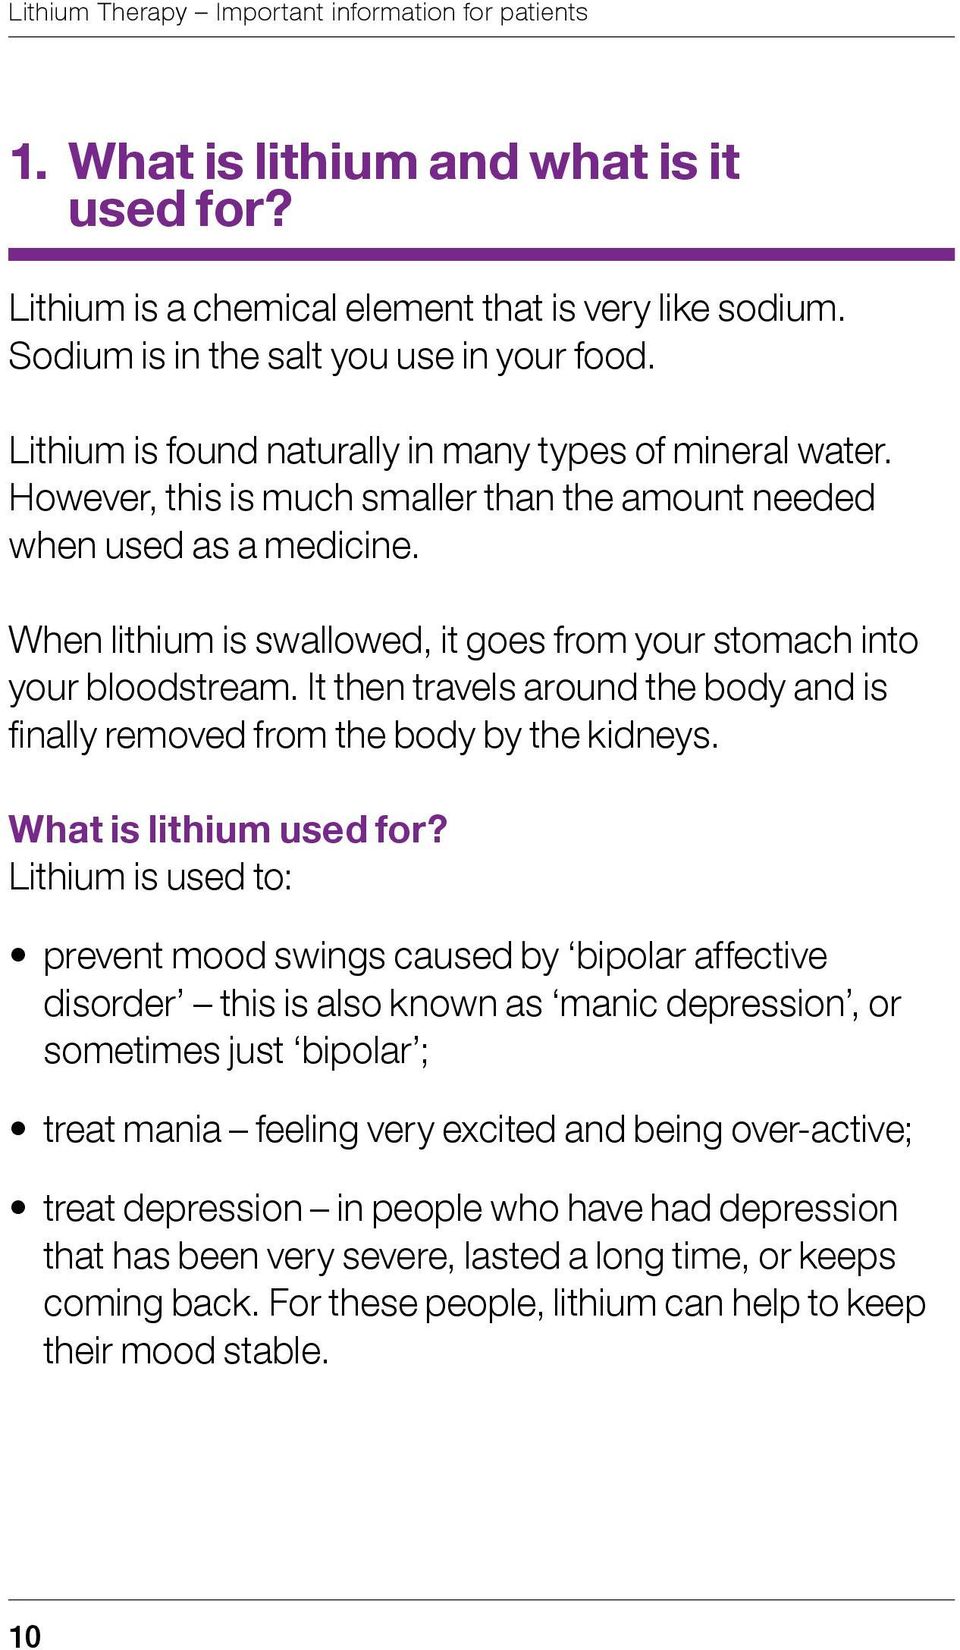 When lithium is swallowed, it goes from your stomach into your bloodstream. It then travels around the body and is finally removed from the body by the kidneys. What is lithium used for?